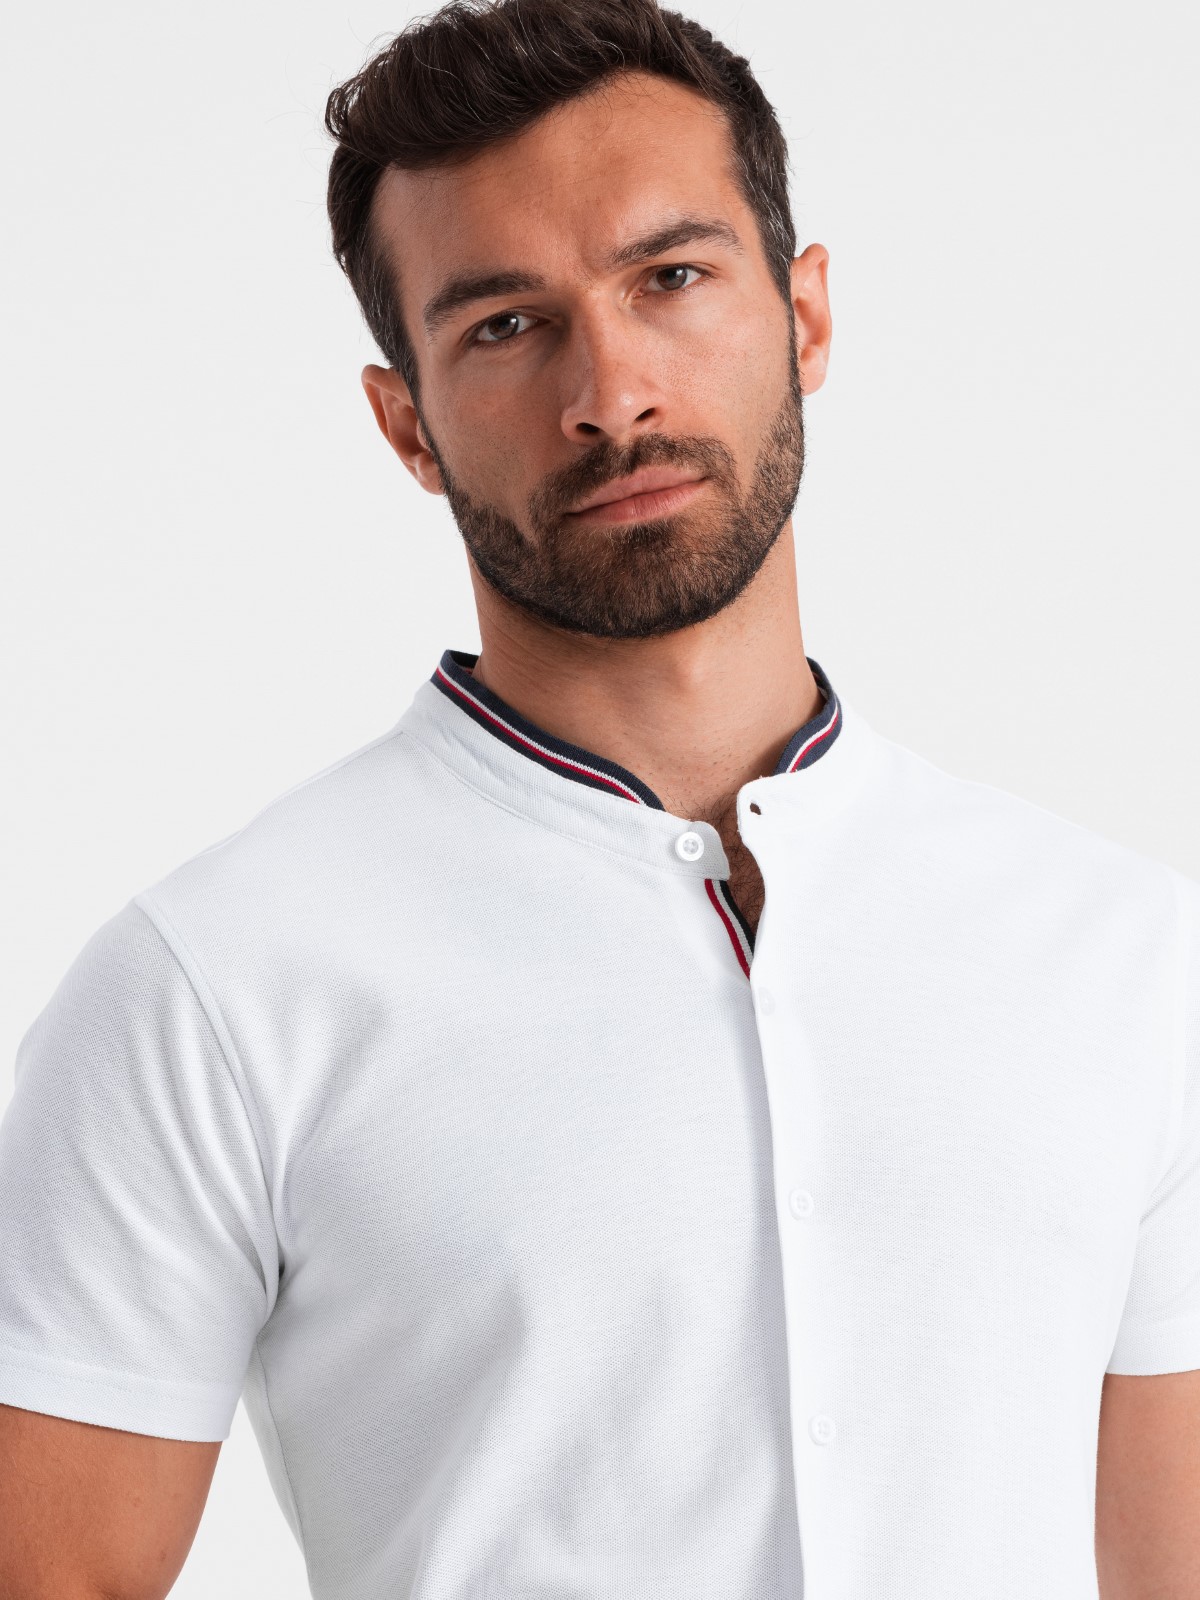 Ombre Men's knitted shirt with short sleeves and collared collar - white